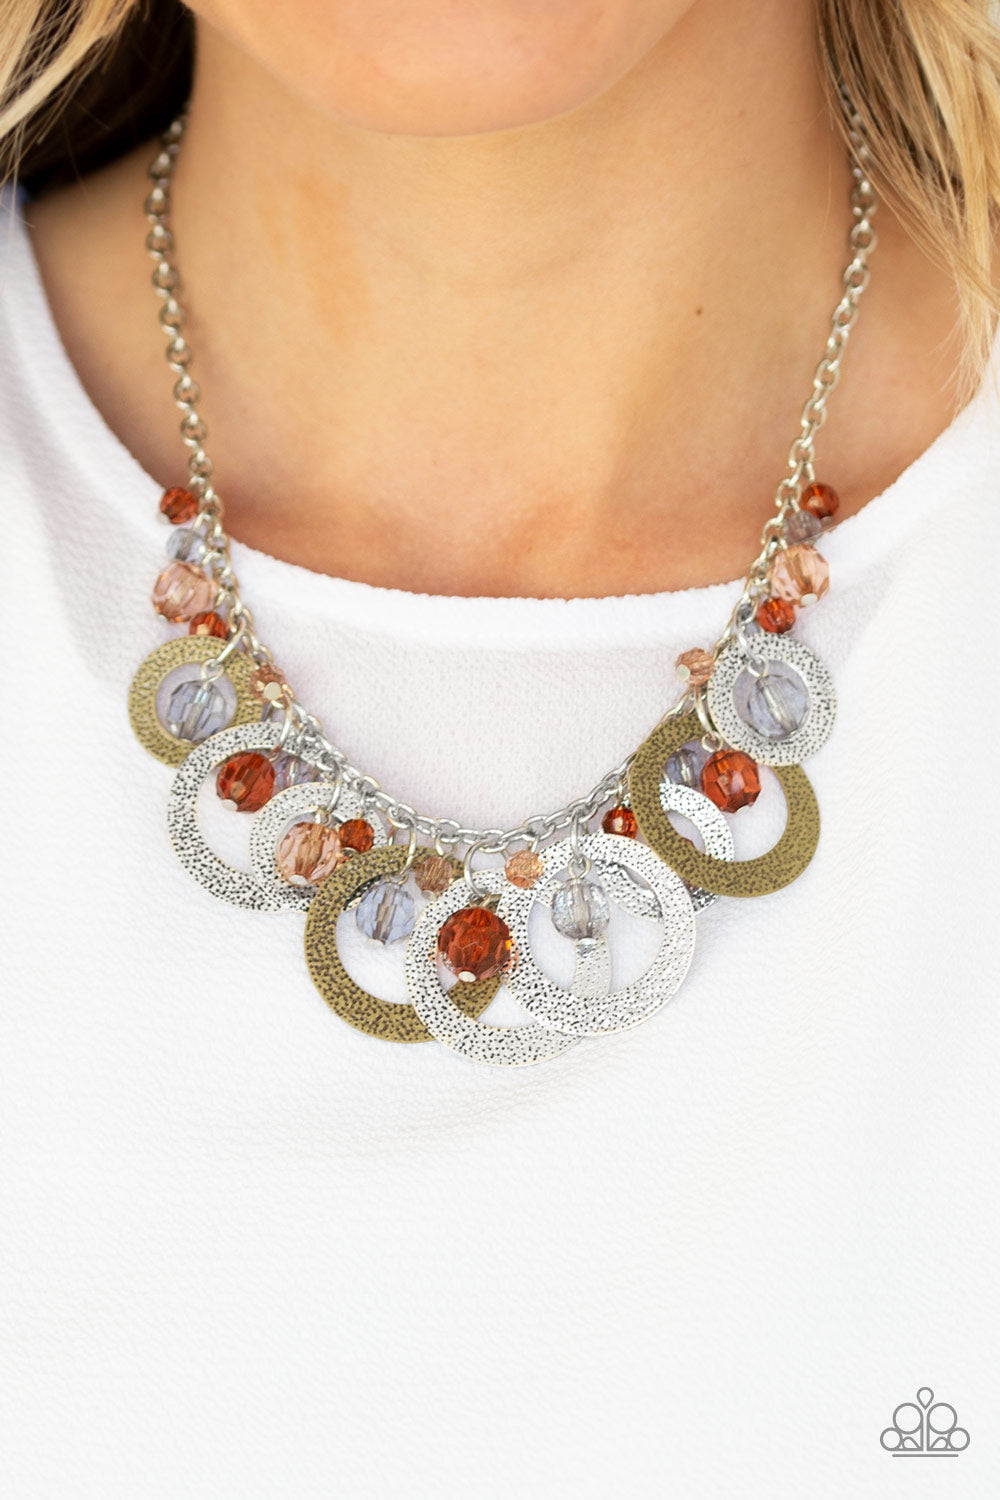 Turn It Up Necklace - Multi